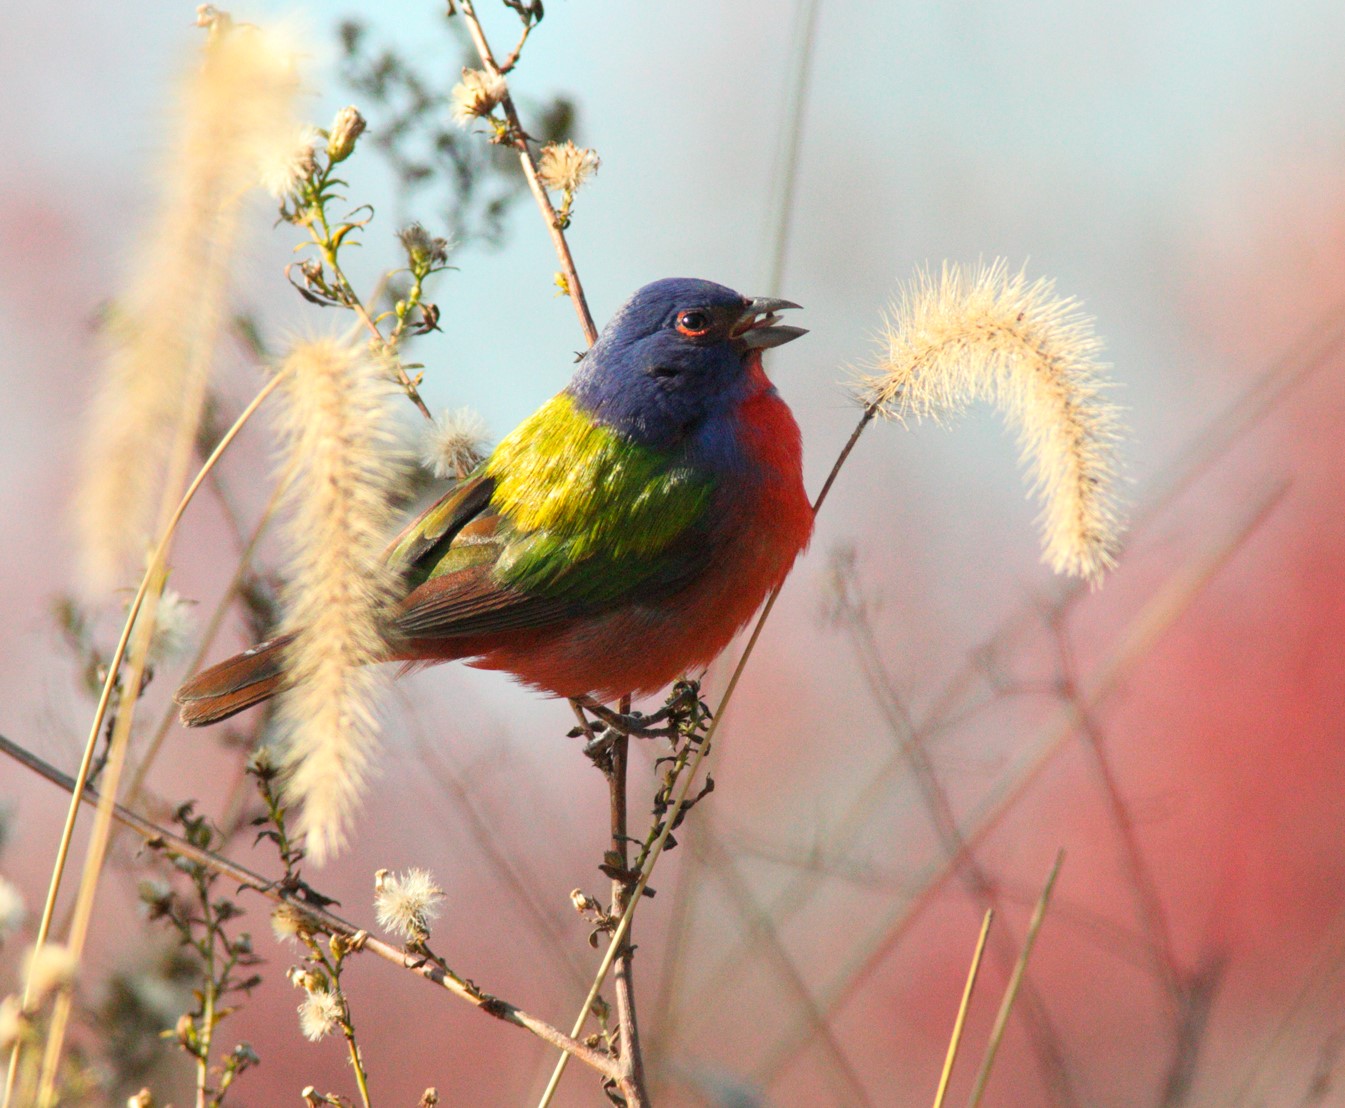 One of Prospect Park’s most famous sightings, this male Painted Bunting appeared in the park in late 2015. Photo: ccho/CC BY-NC-ND 2.0